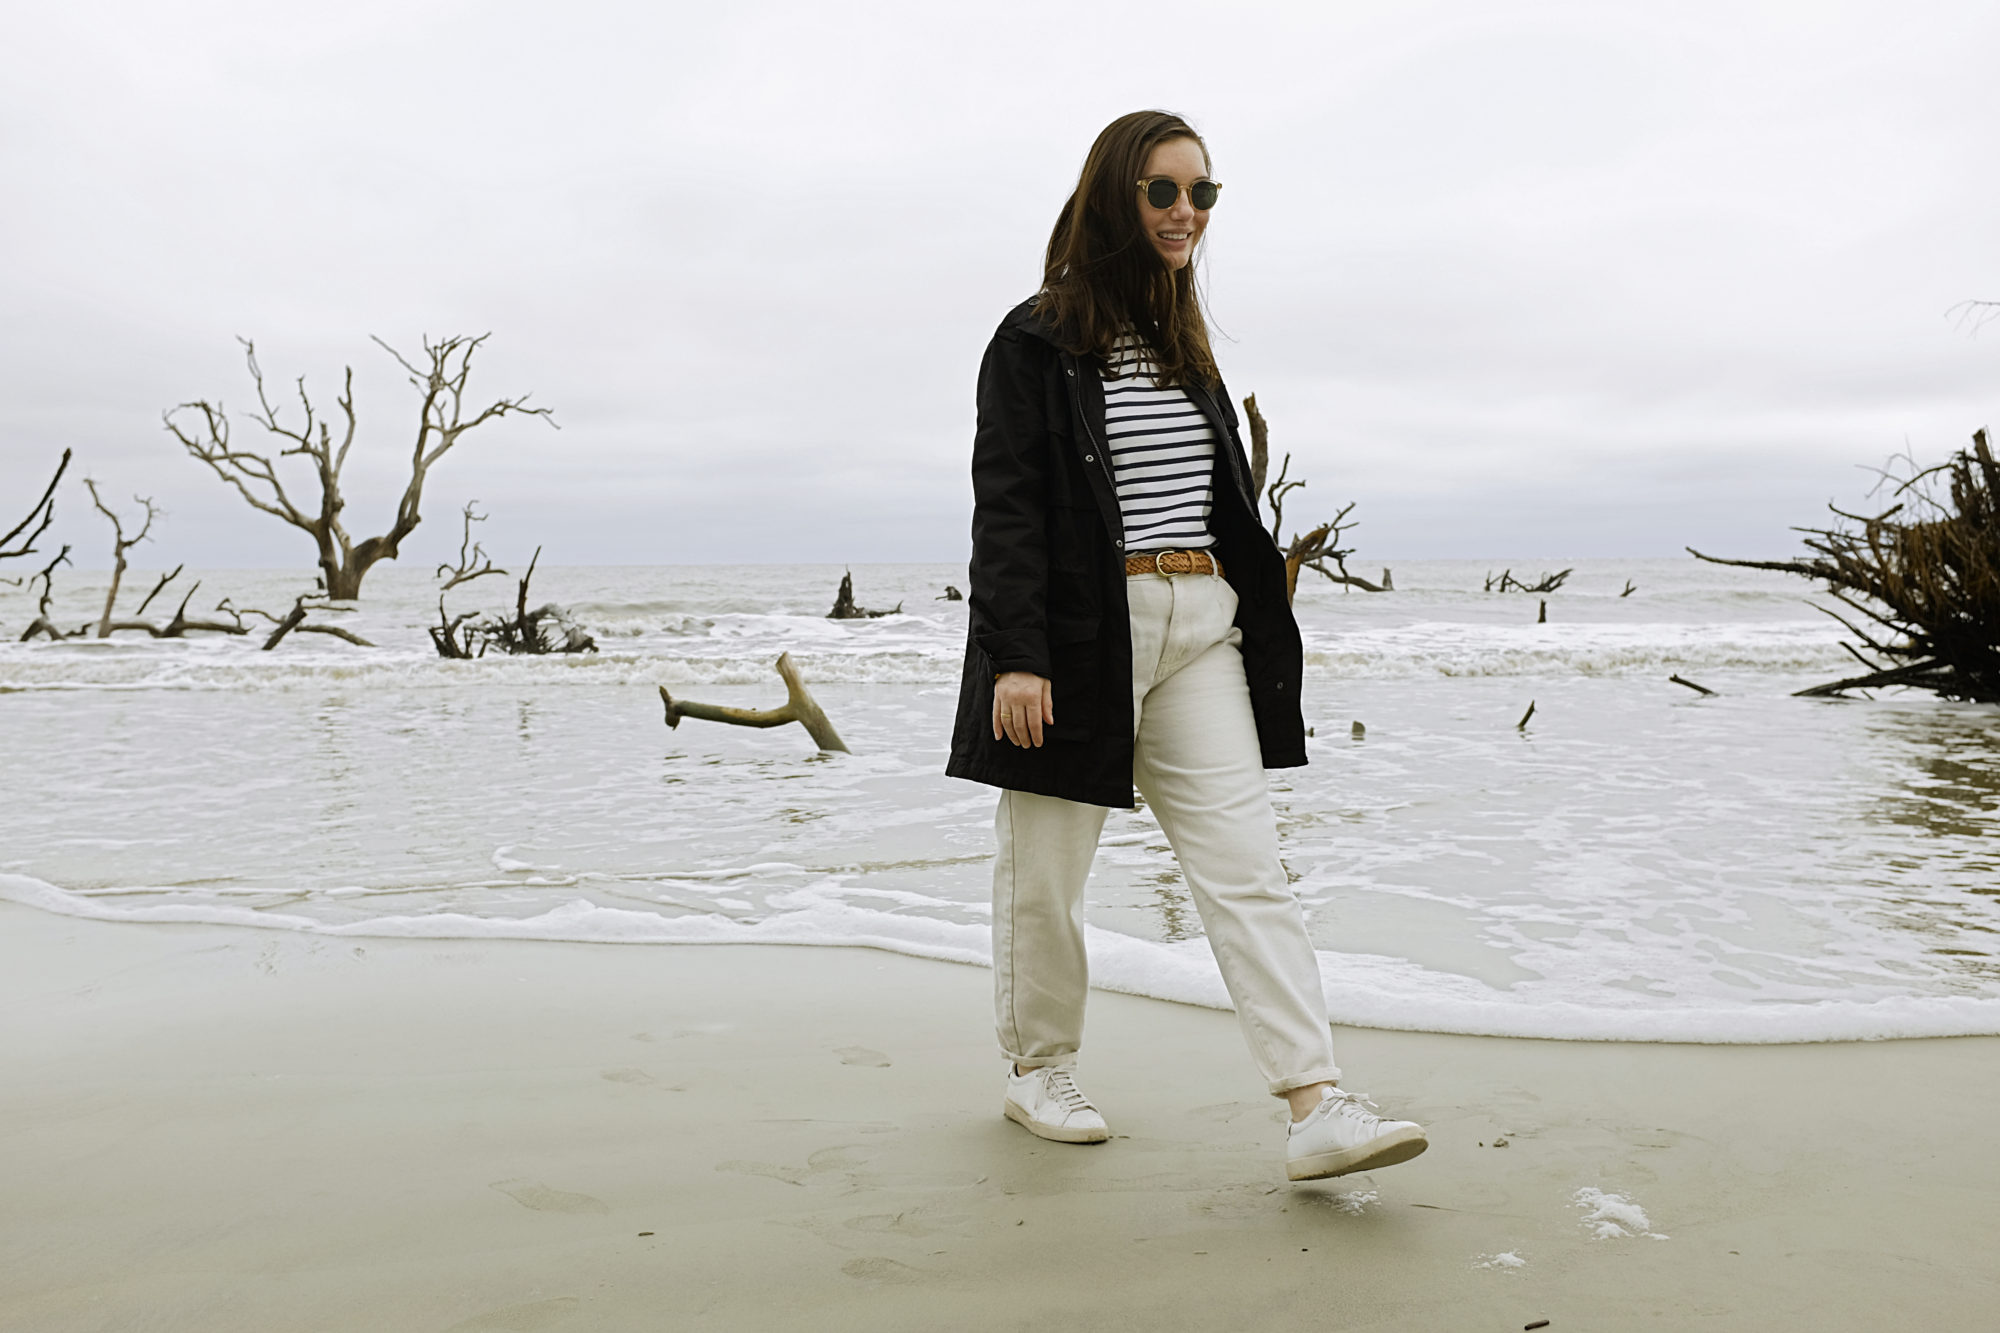 Alyssa walks on the beach in a white striped top and white jeans